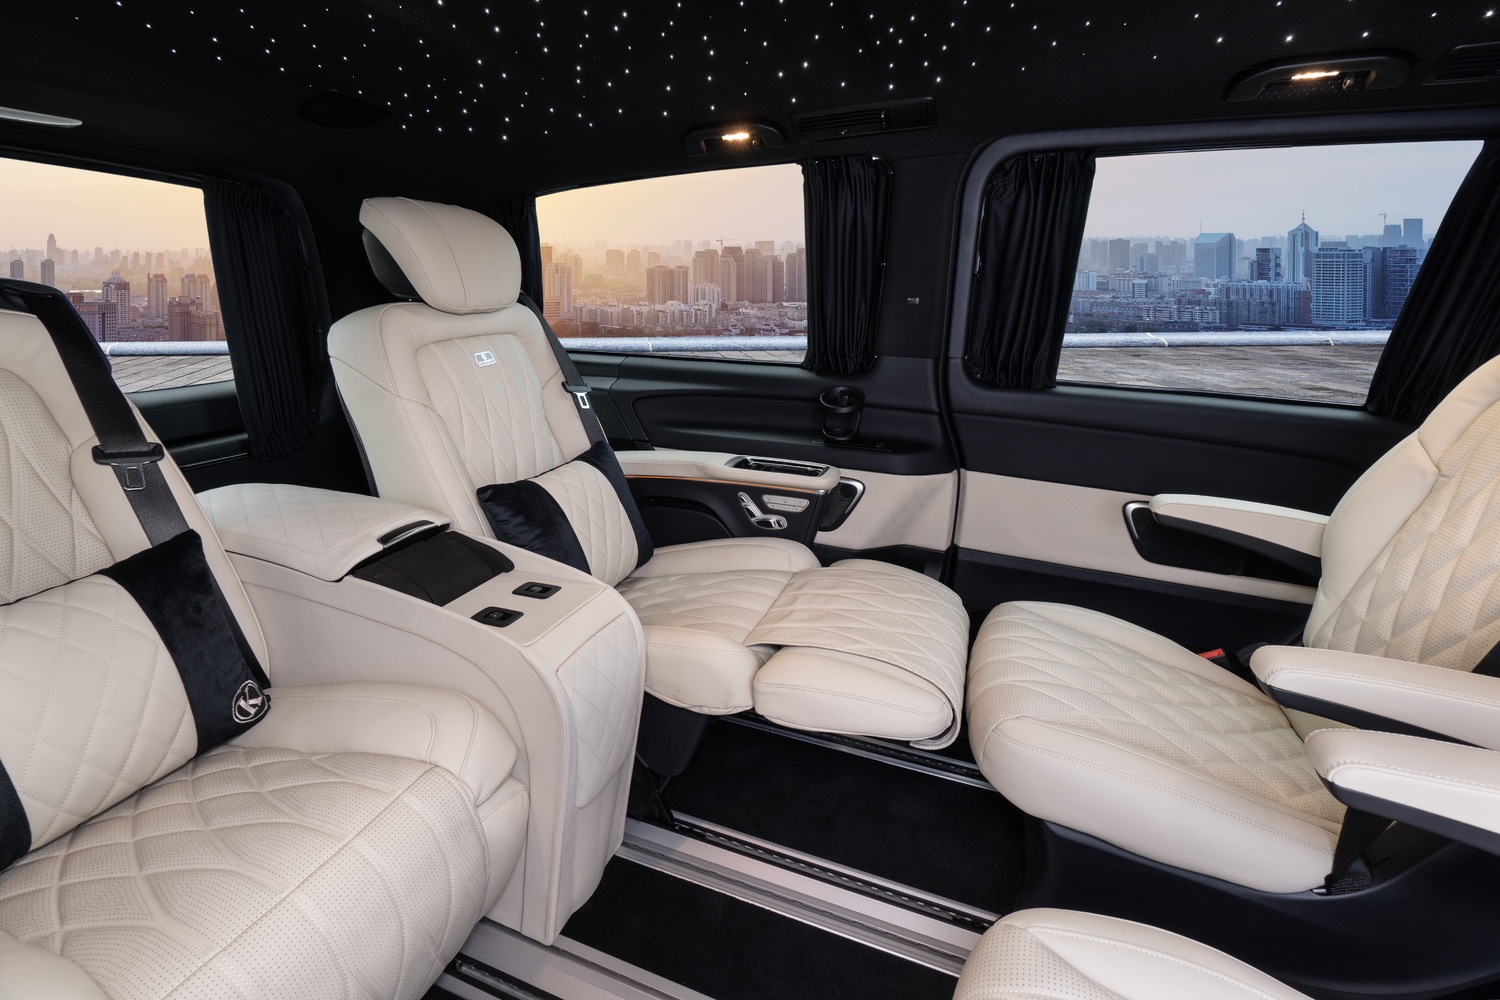 VIP PARTITION WALL With this model, your privacy is Priority. Decide for yourself on the variation of your seats and combine them with a partition wall with built-in 32 inch TV for the ultimate separation from the driver and entertainment option.